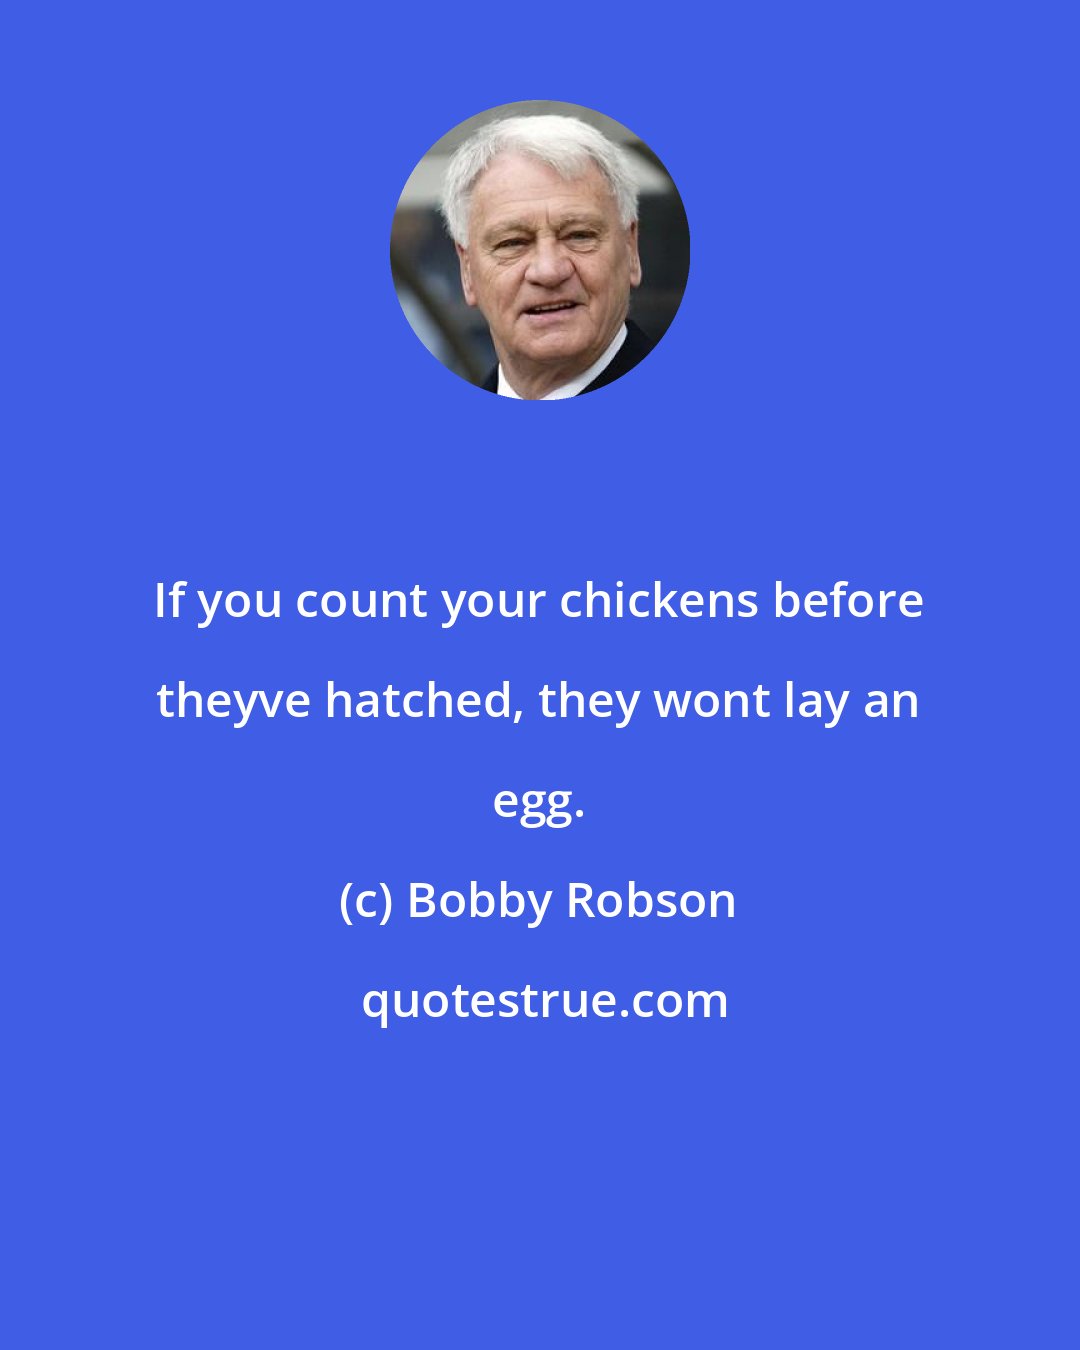 Bobby Robson: If you count your chickens before theyve hatched, they wont lay an egg.